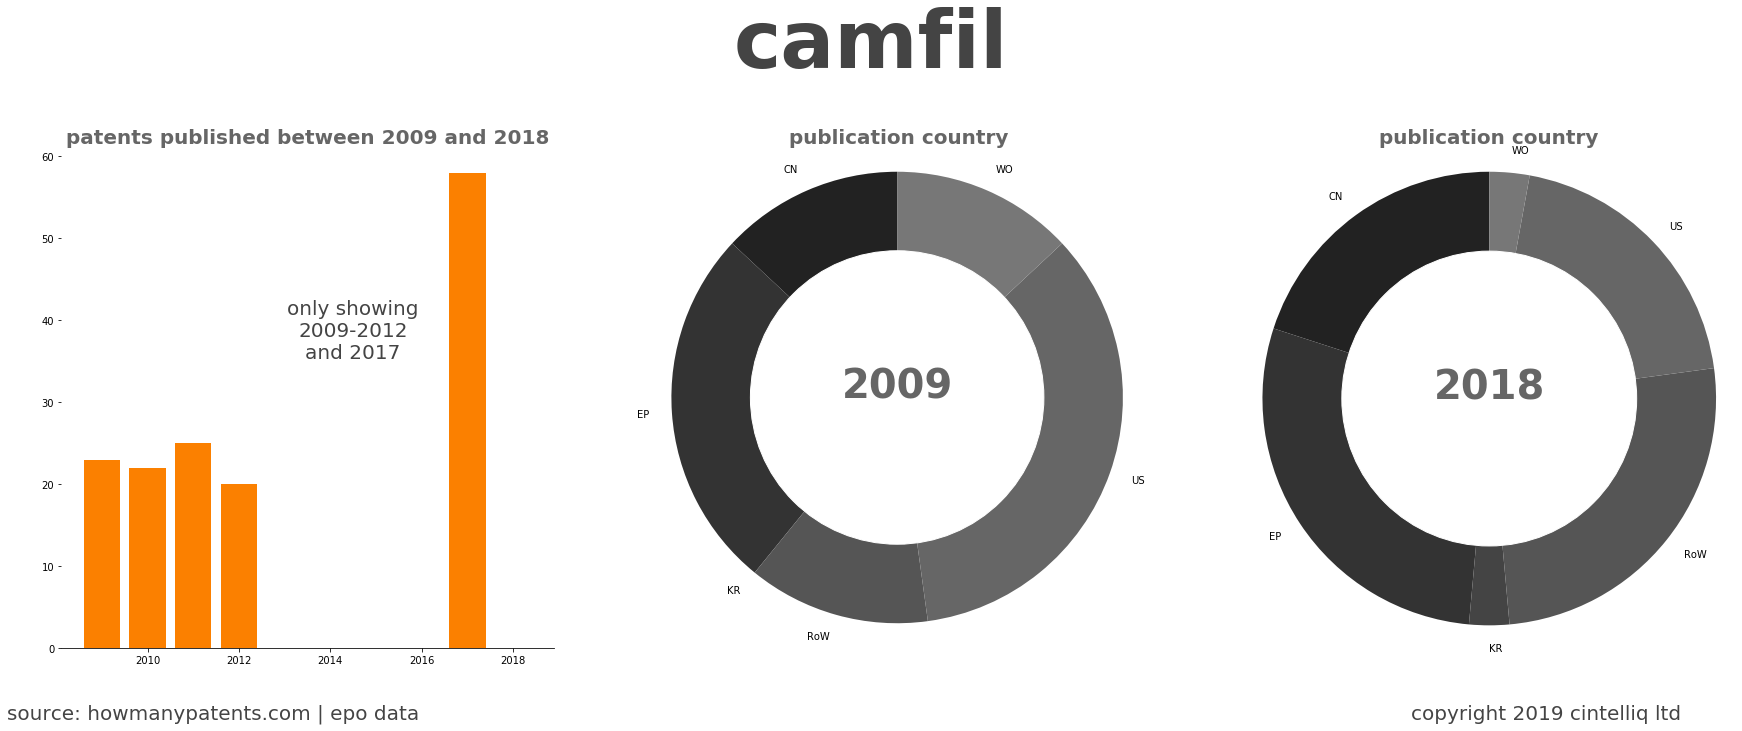 summary of patents for Camfil